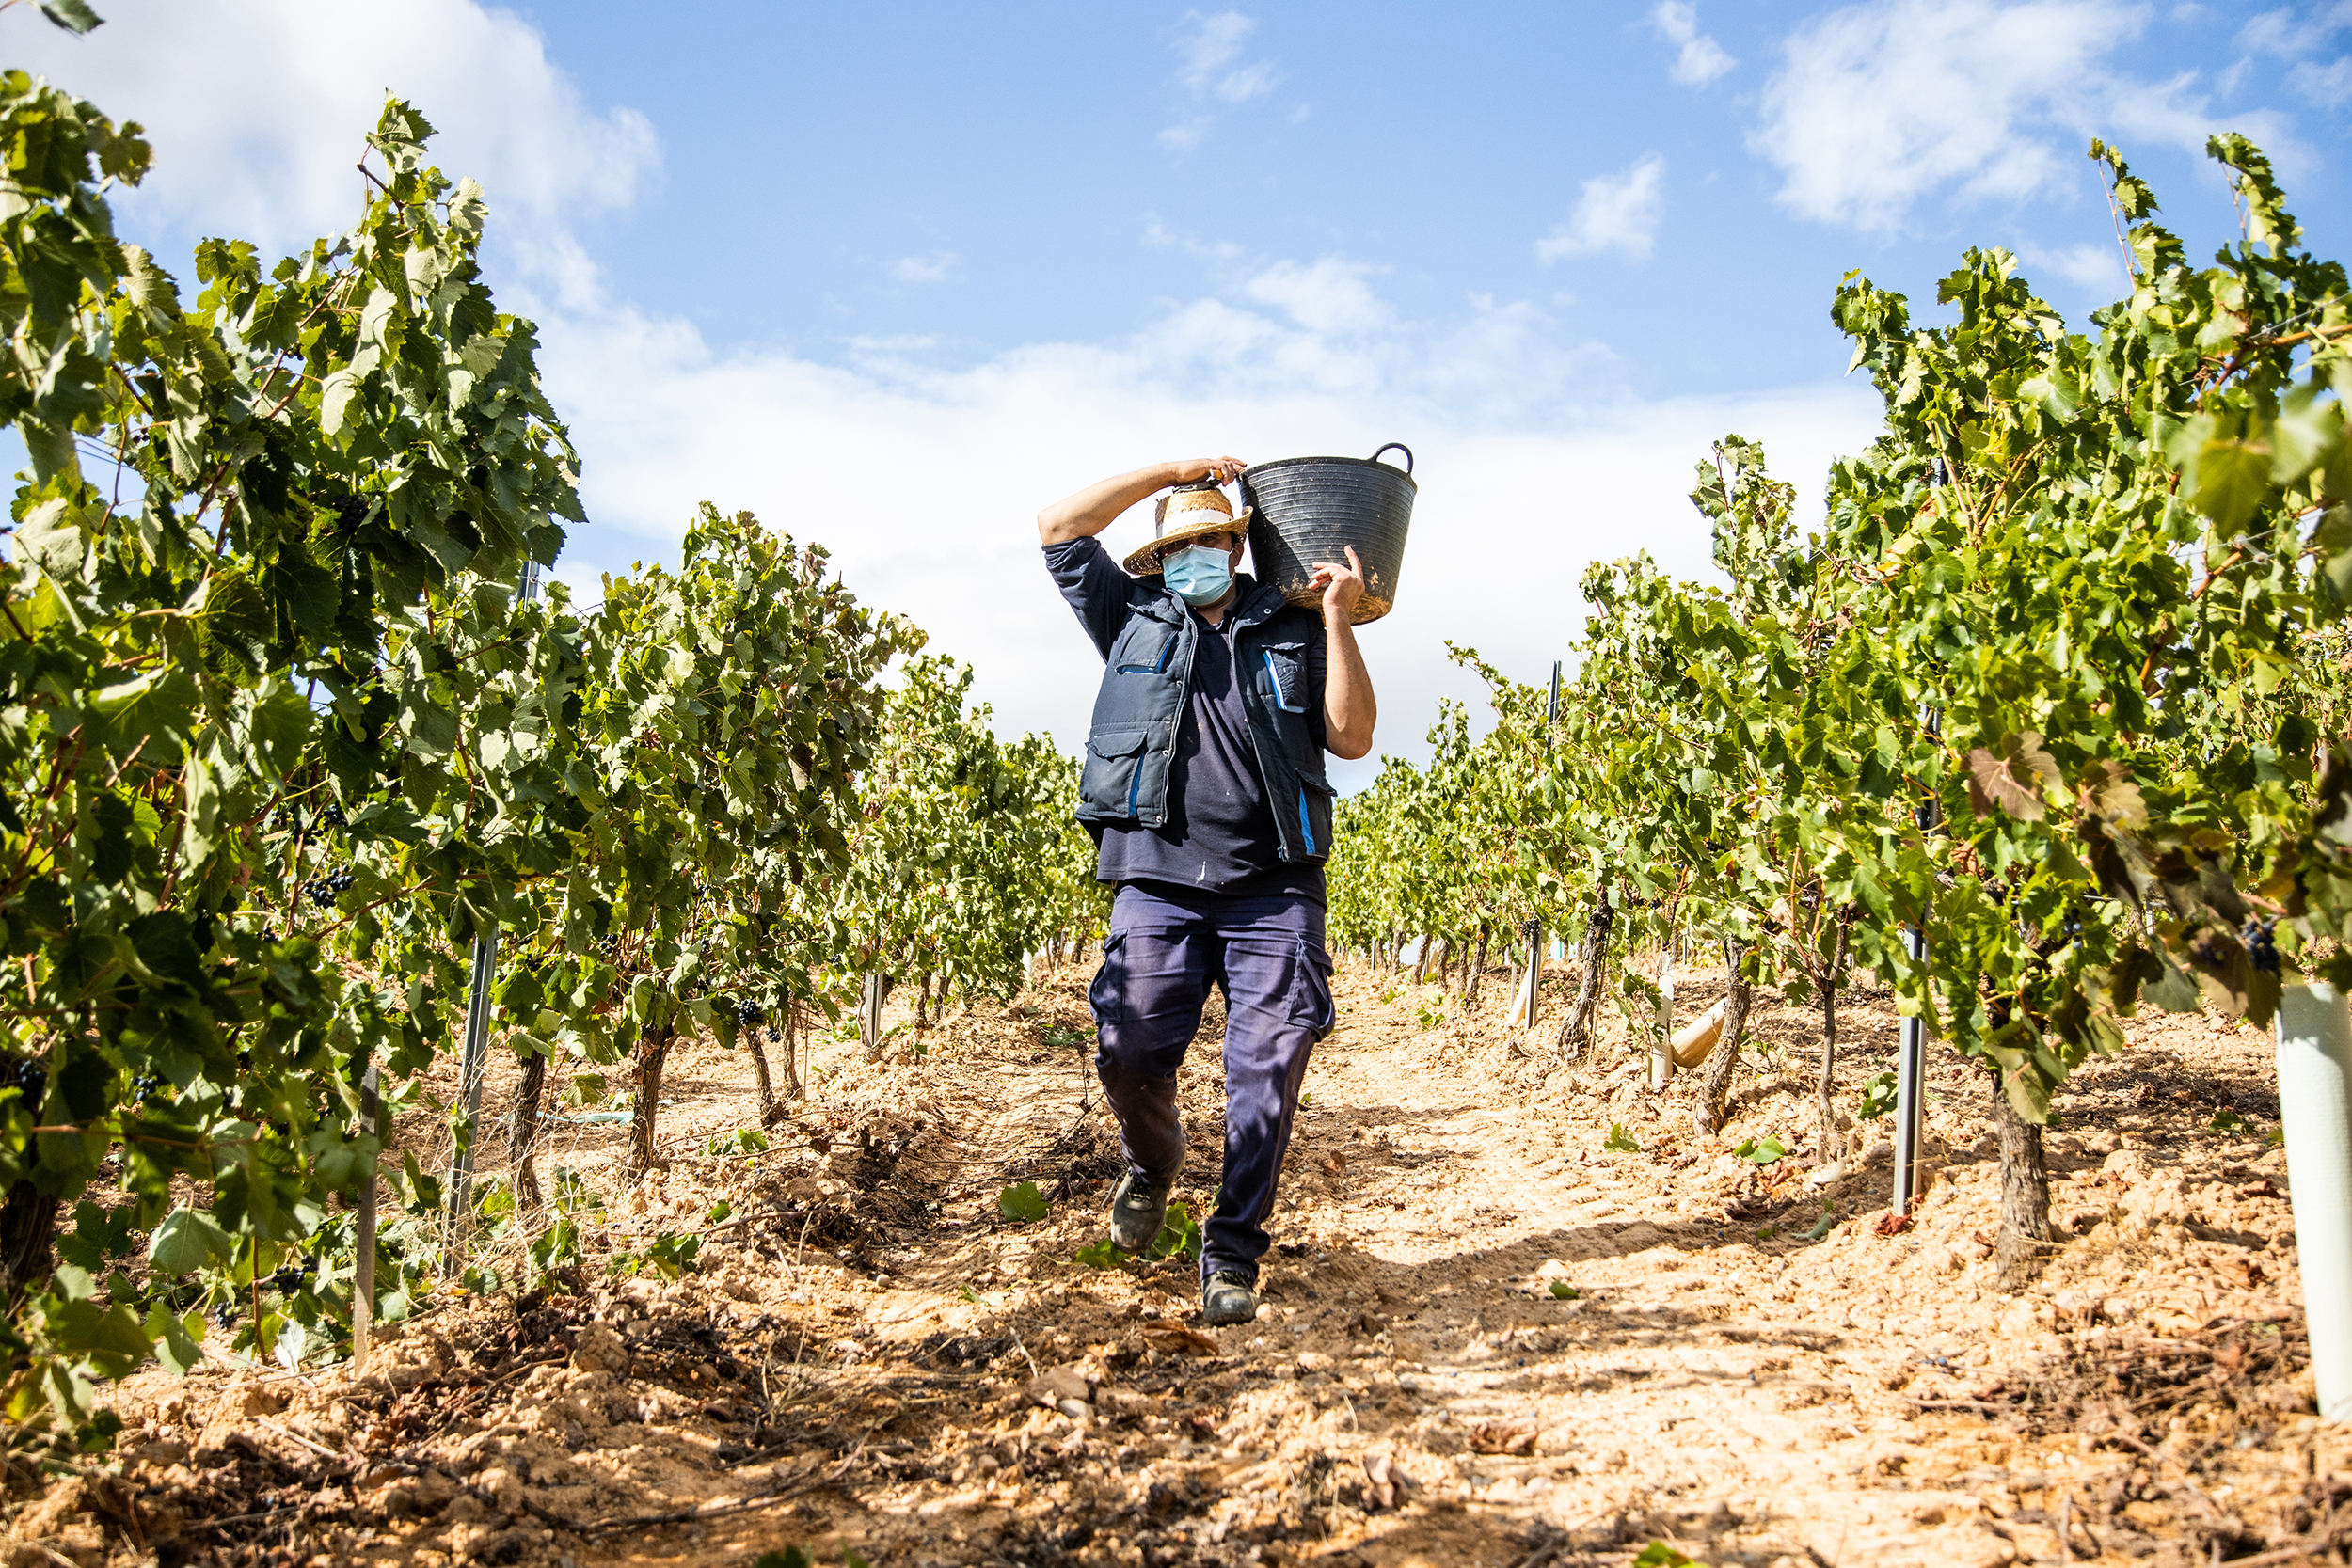 male agricultural worker collecting bunches of grapes in his basket for harvest in a vineyard